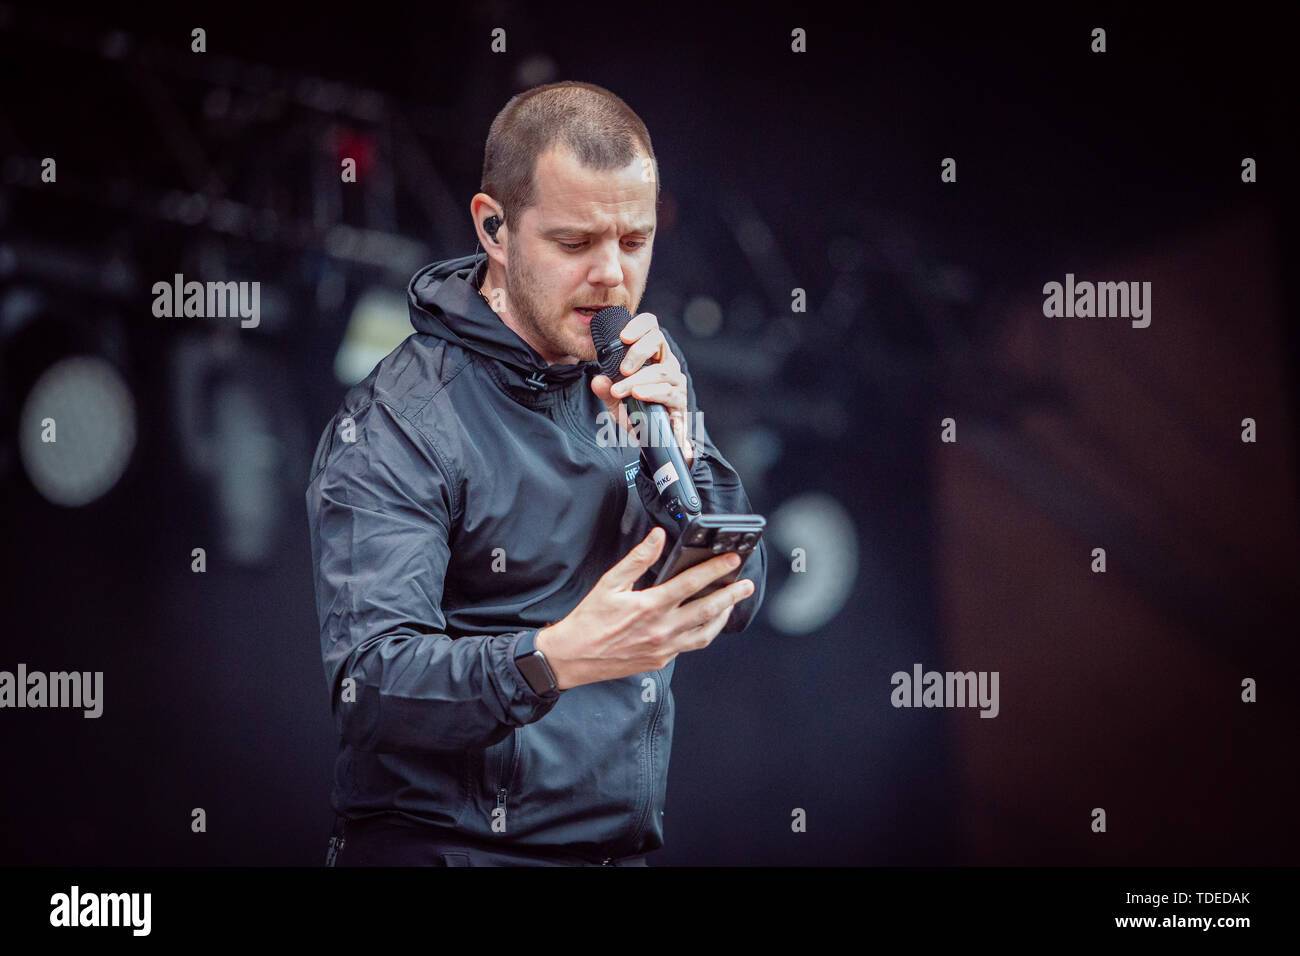 Oslo, Norway. 14th June, 2019. Oslo, Norway - June 14, 2019. The English  rapper, musician and record producer Mike Skinner is best known by his  music project The Streets and is here